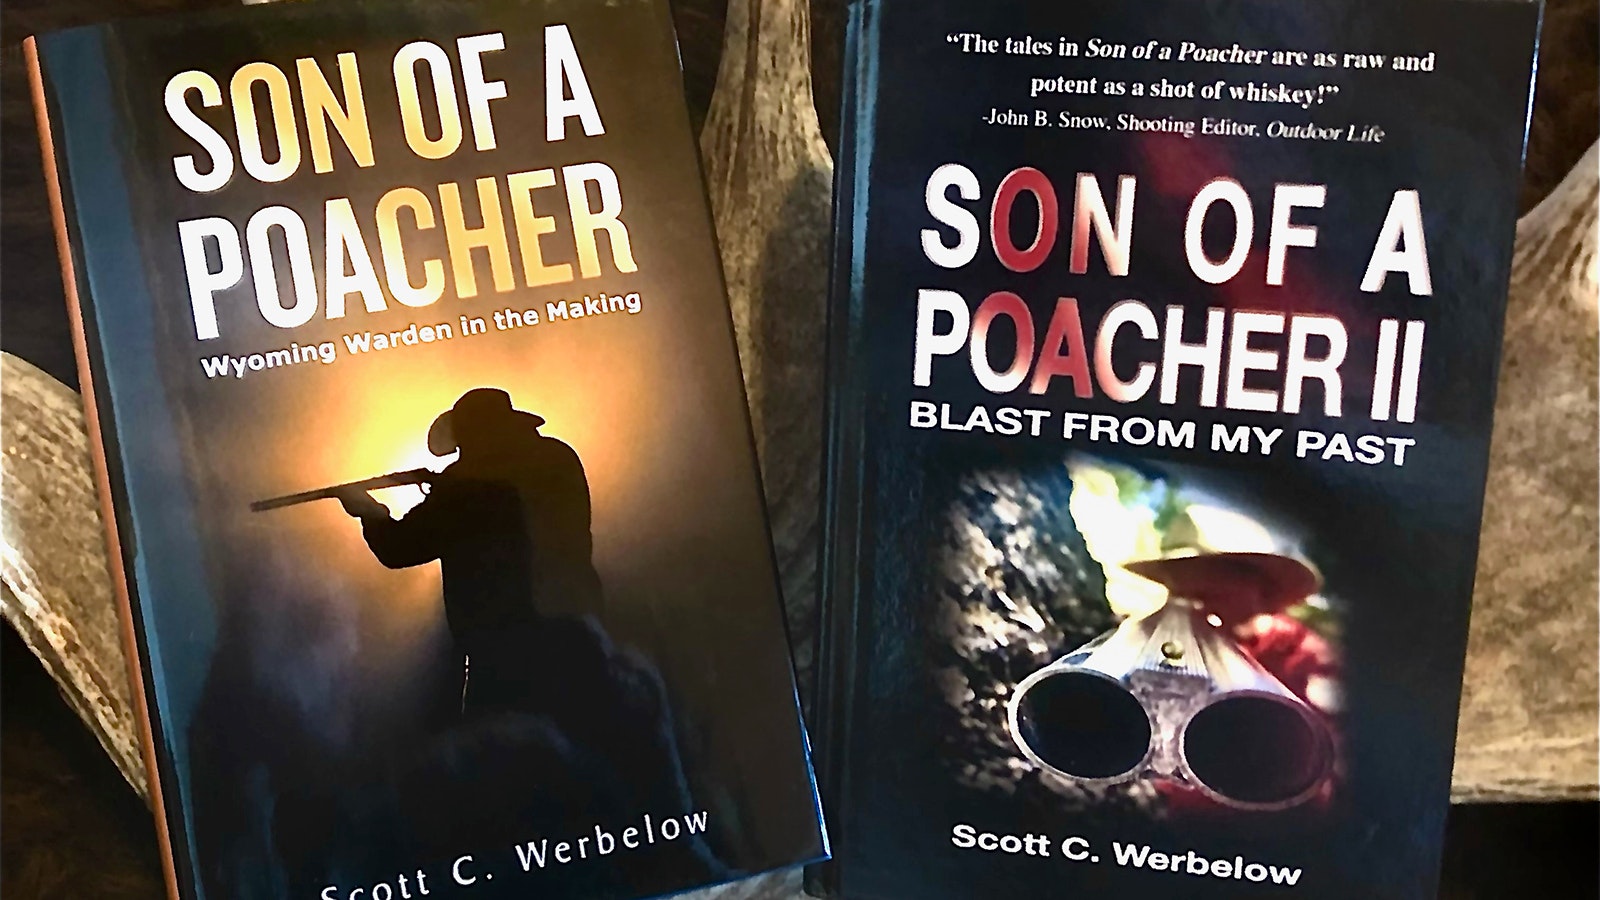 Scott Werbelow has written two books in his “Son of a Poacher” autobiographical series, and has more planned.